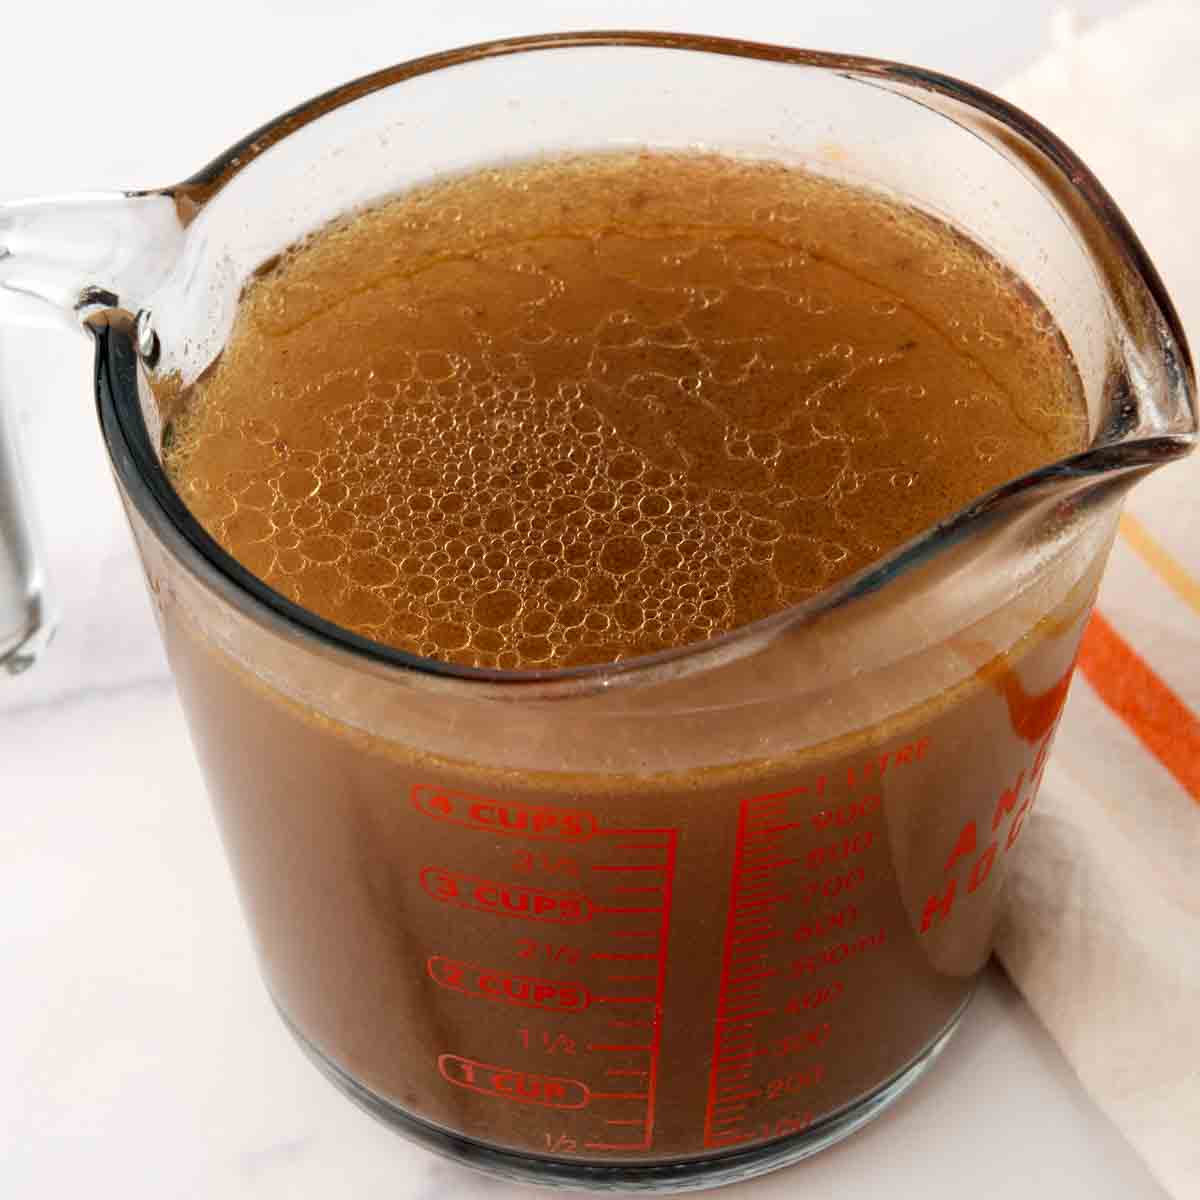 Chicken hearts broth in a measuring cup.